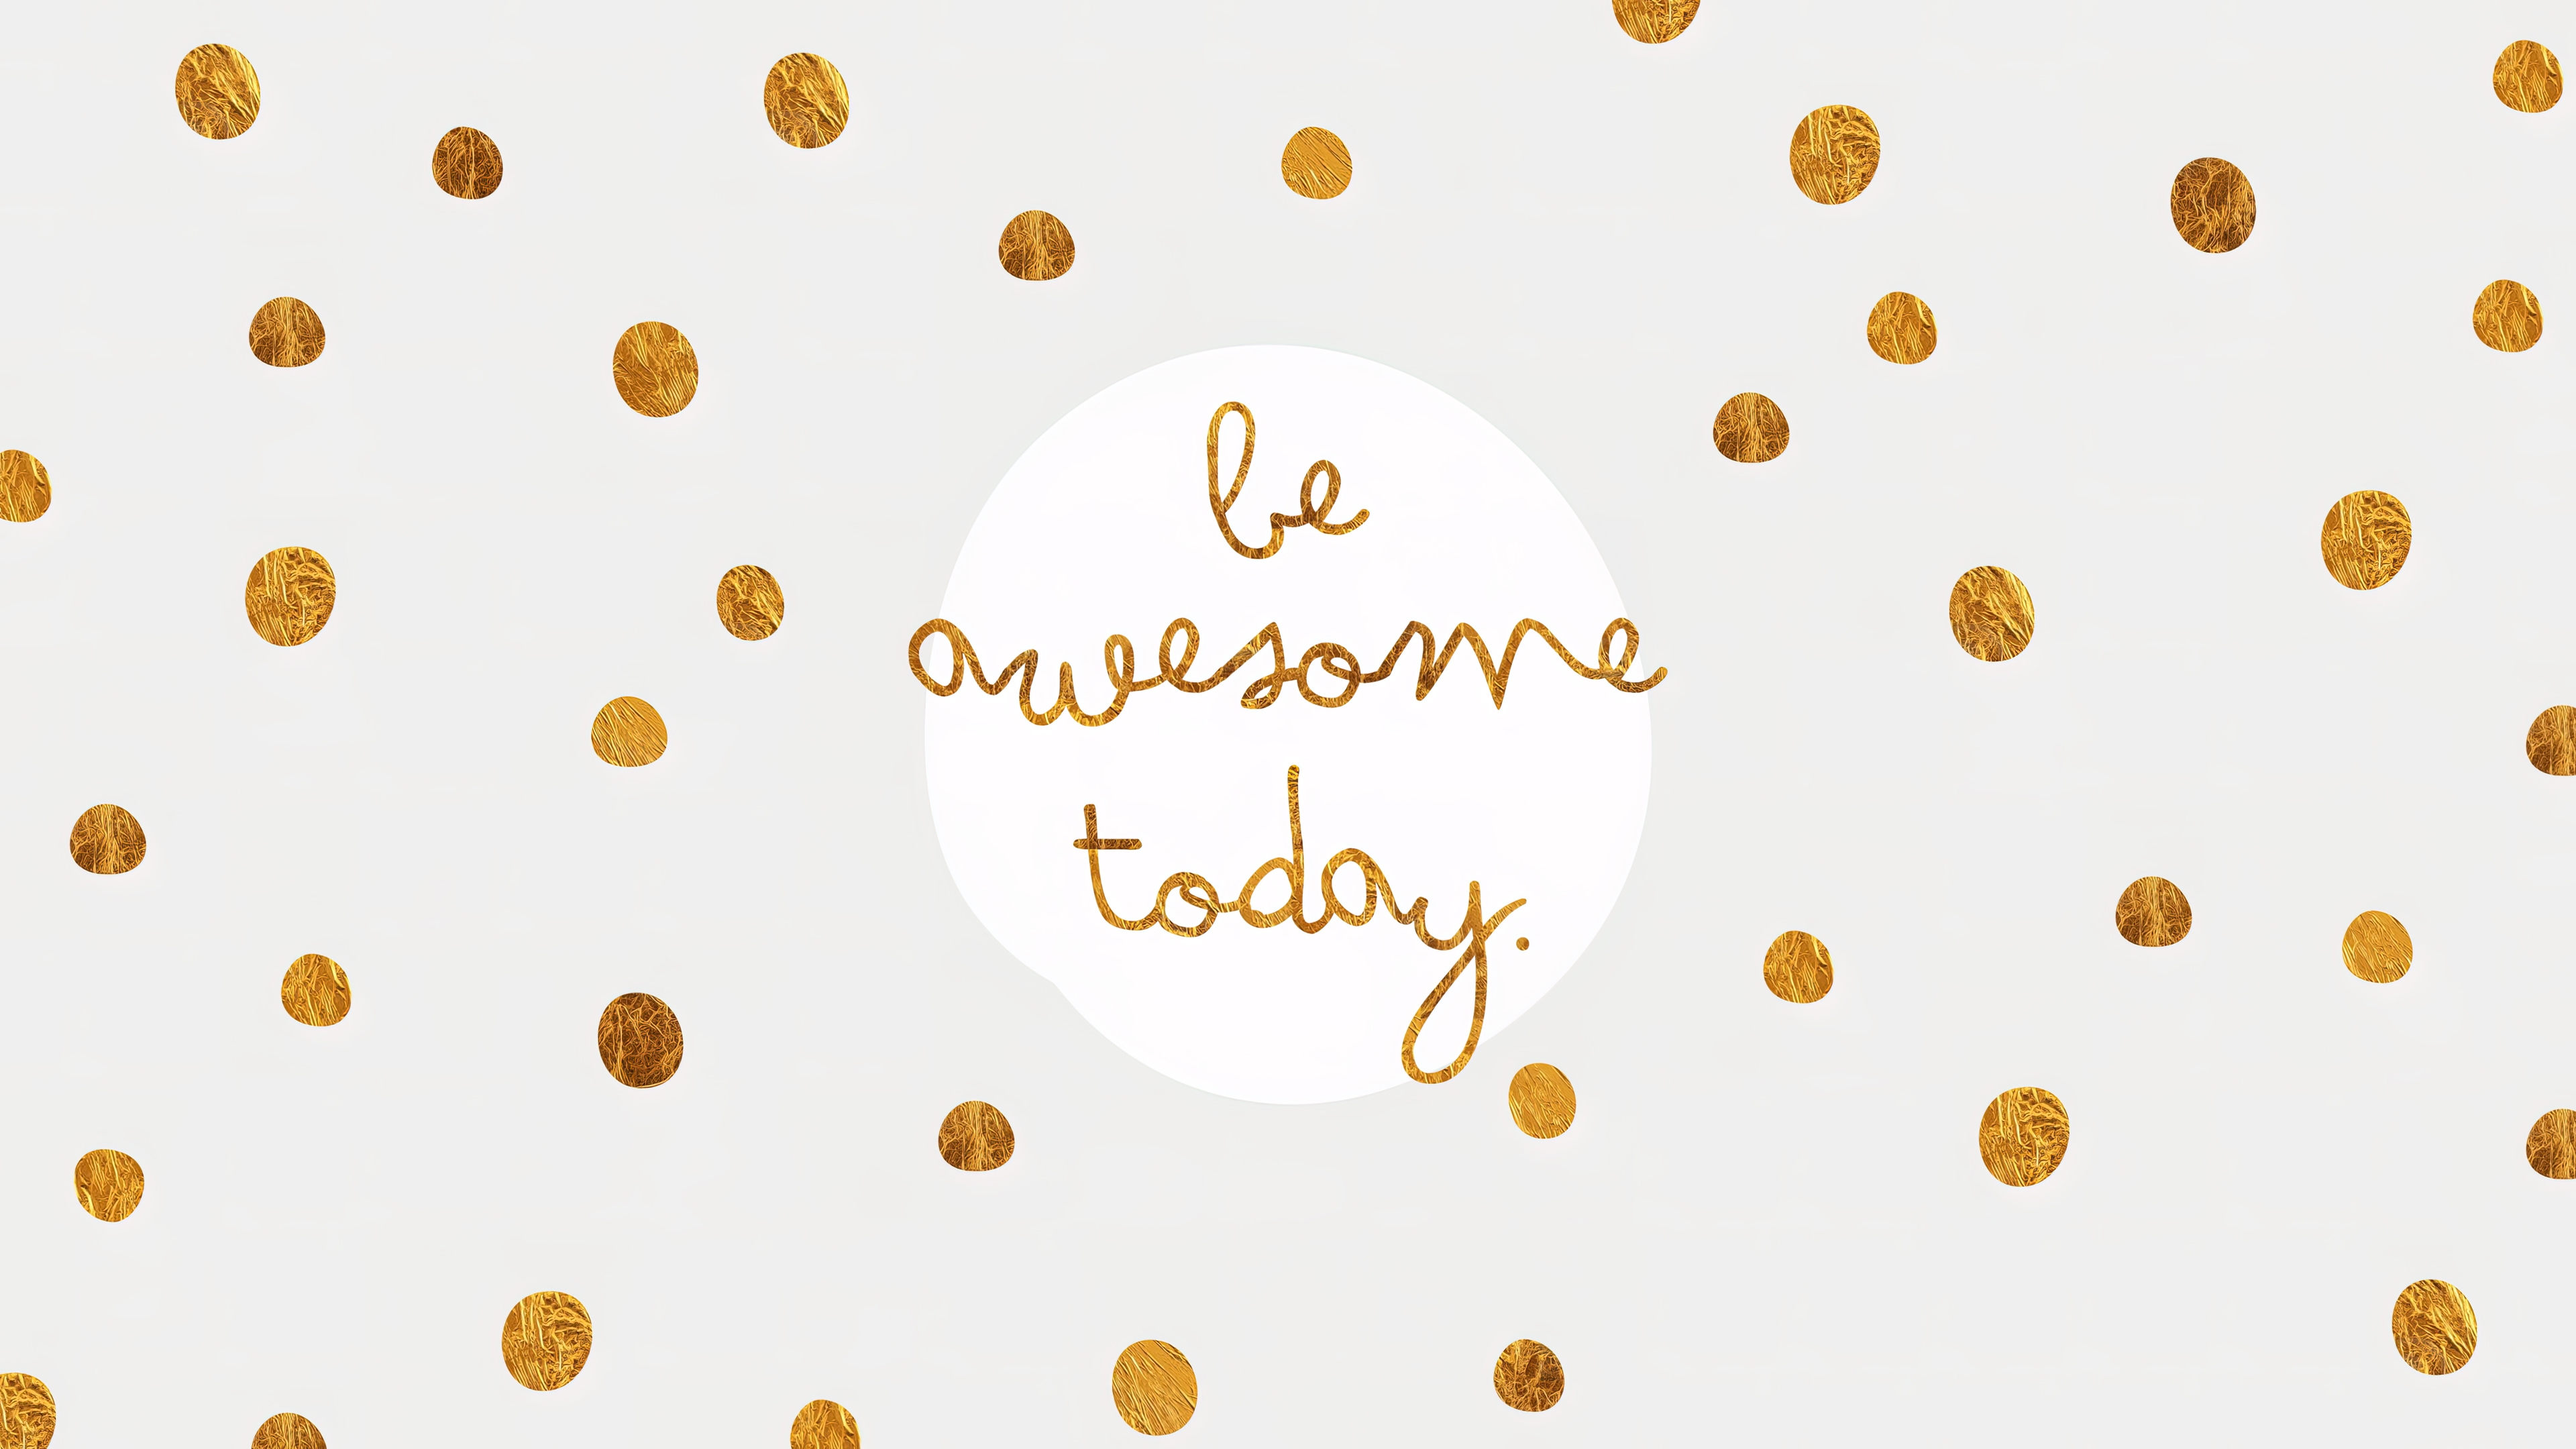 HD wallpaper, Be Awesome, White Background, Gold Polka Dots